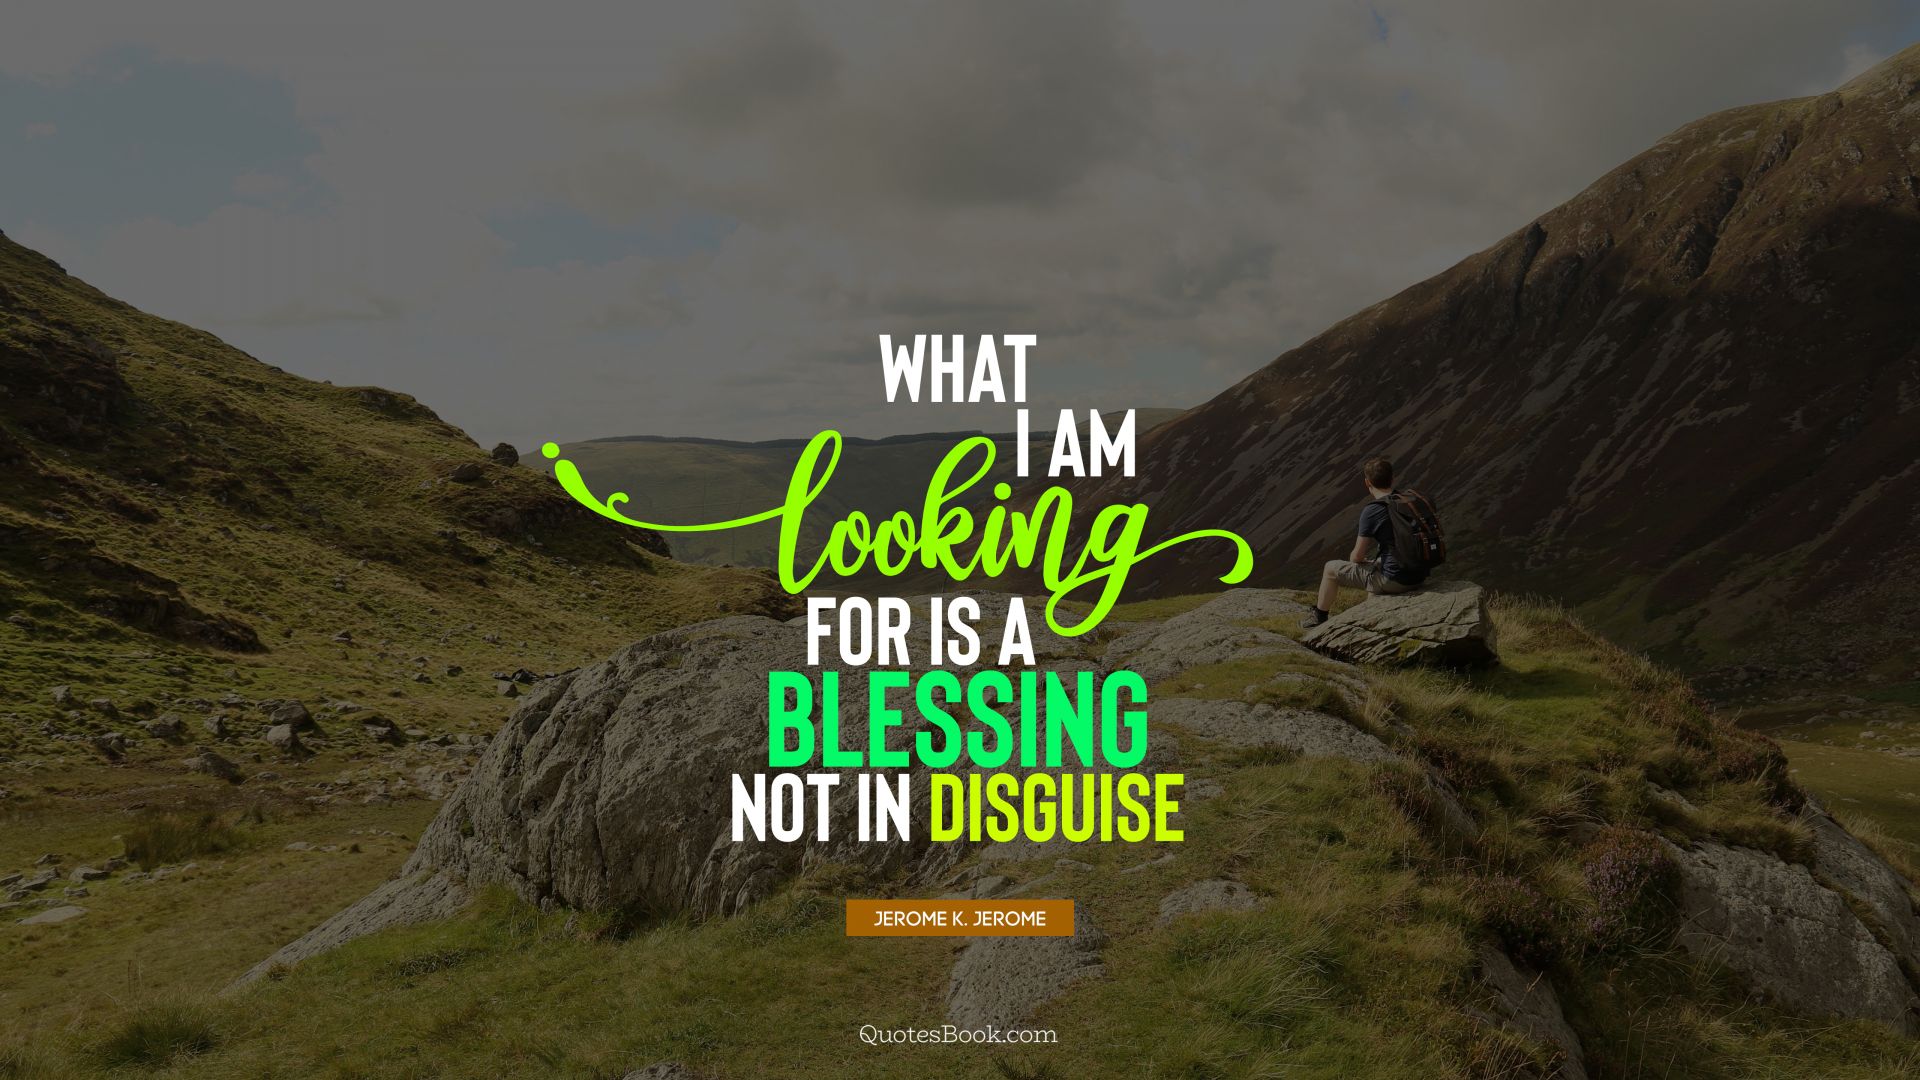 What I am looking for is a blessing not in disguise. - Quote by Jerome K. Jerome